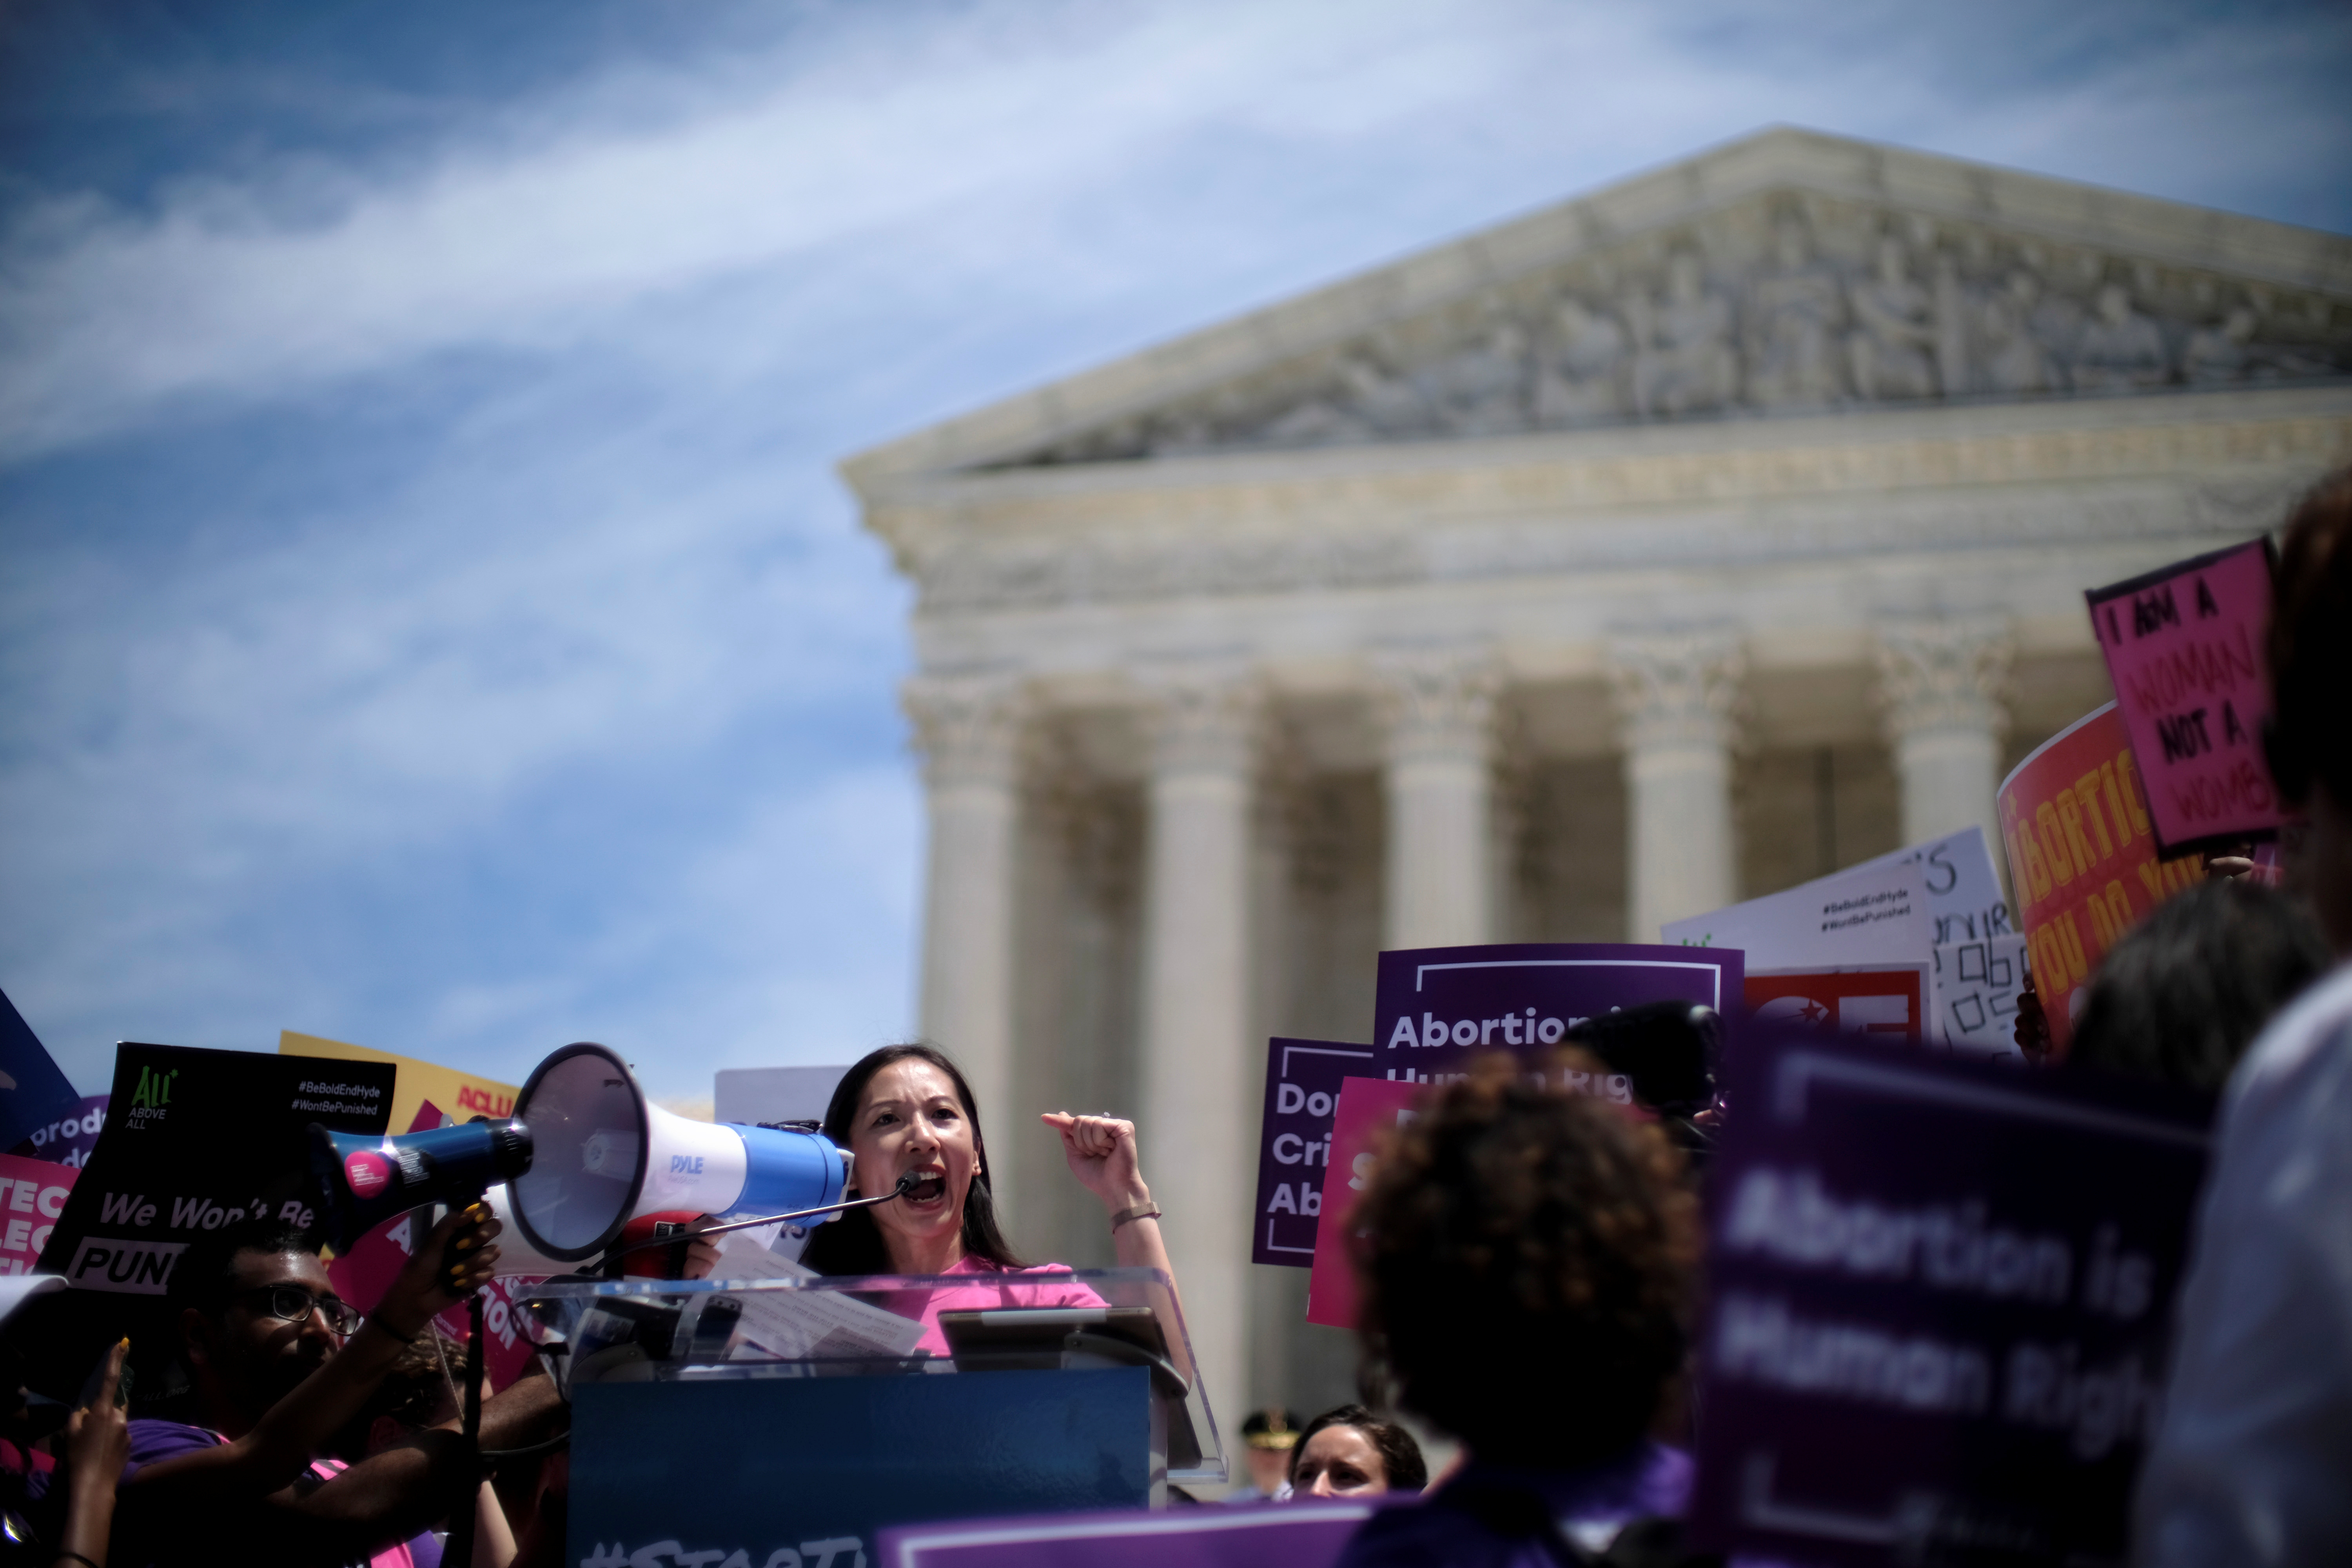 Planned Parenthood president Dr. Leana Wen speaks at a protest against anti-abortion legislation at the U.S. Supreme Court in Washington, U.S., May 21, 2019. REUTERS/James Lawler Duggan - RC1F9FEDC140